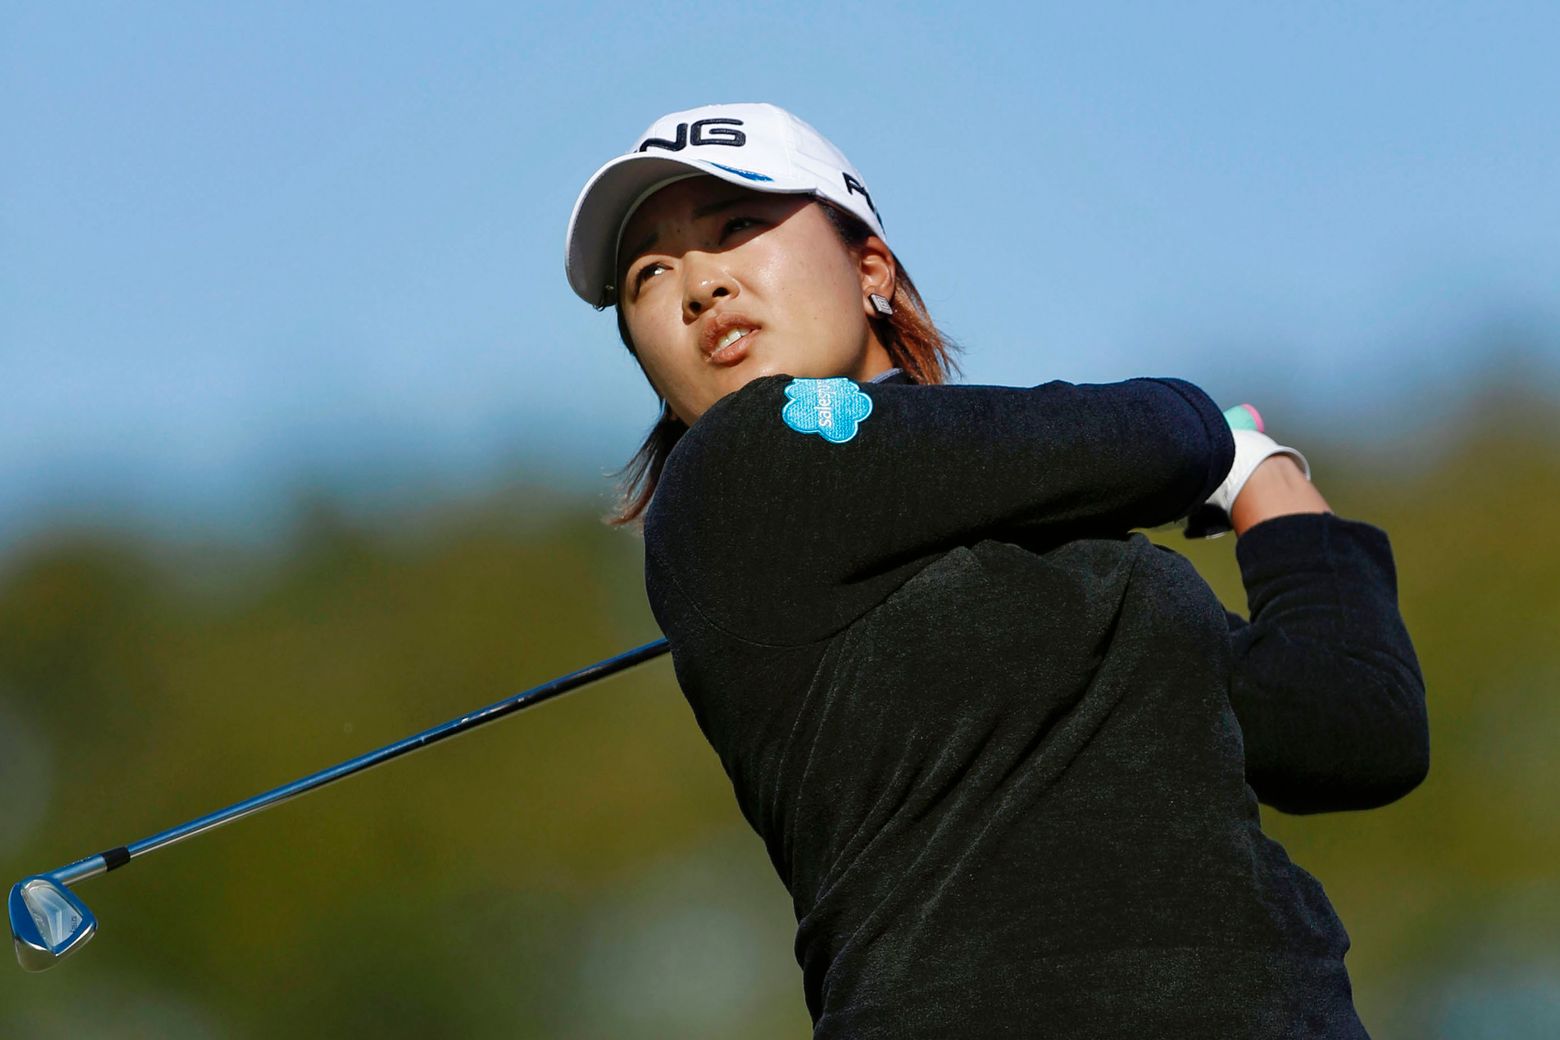 Suzuki shoots 67 to win Japan Classic by 3 strokes | The Seattle Times